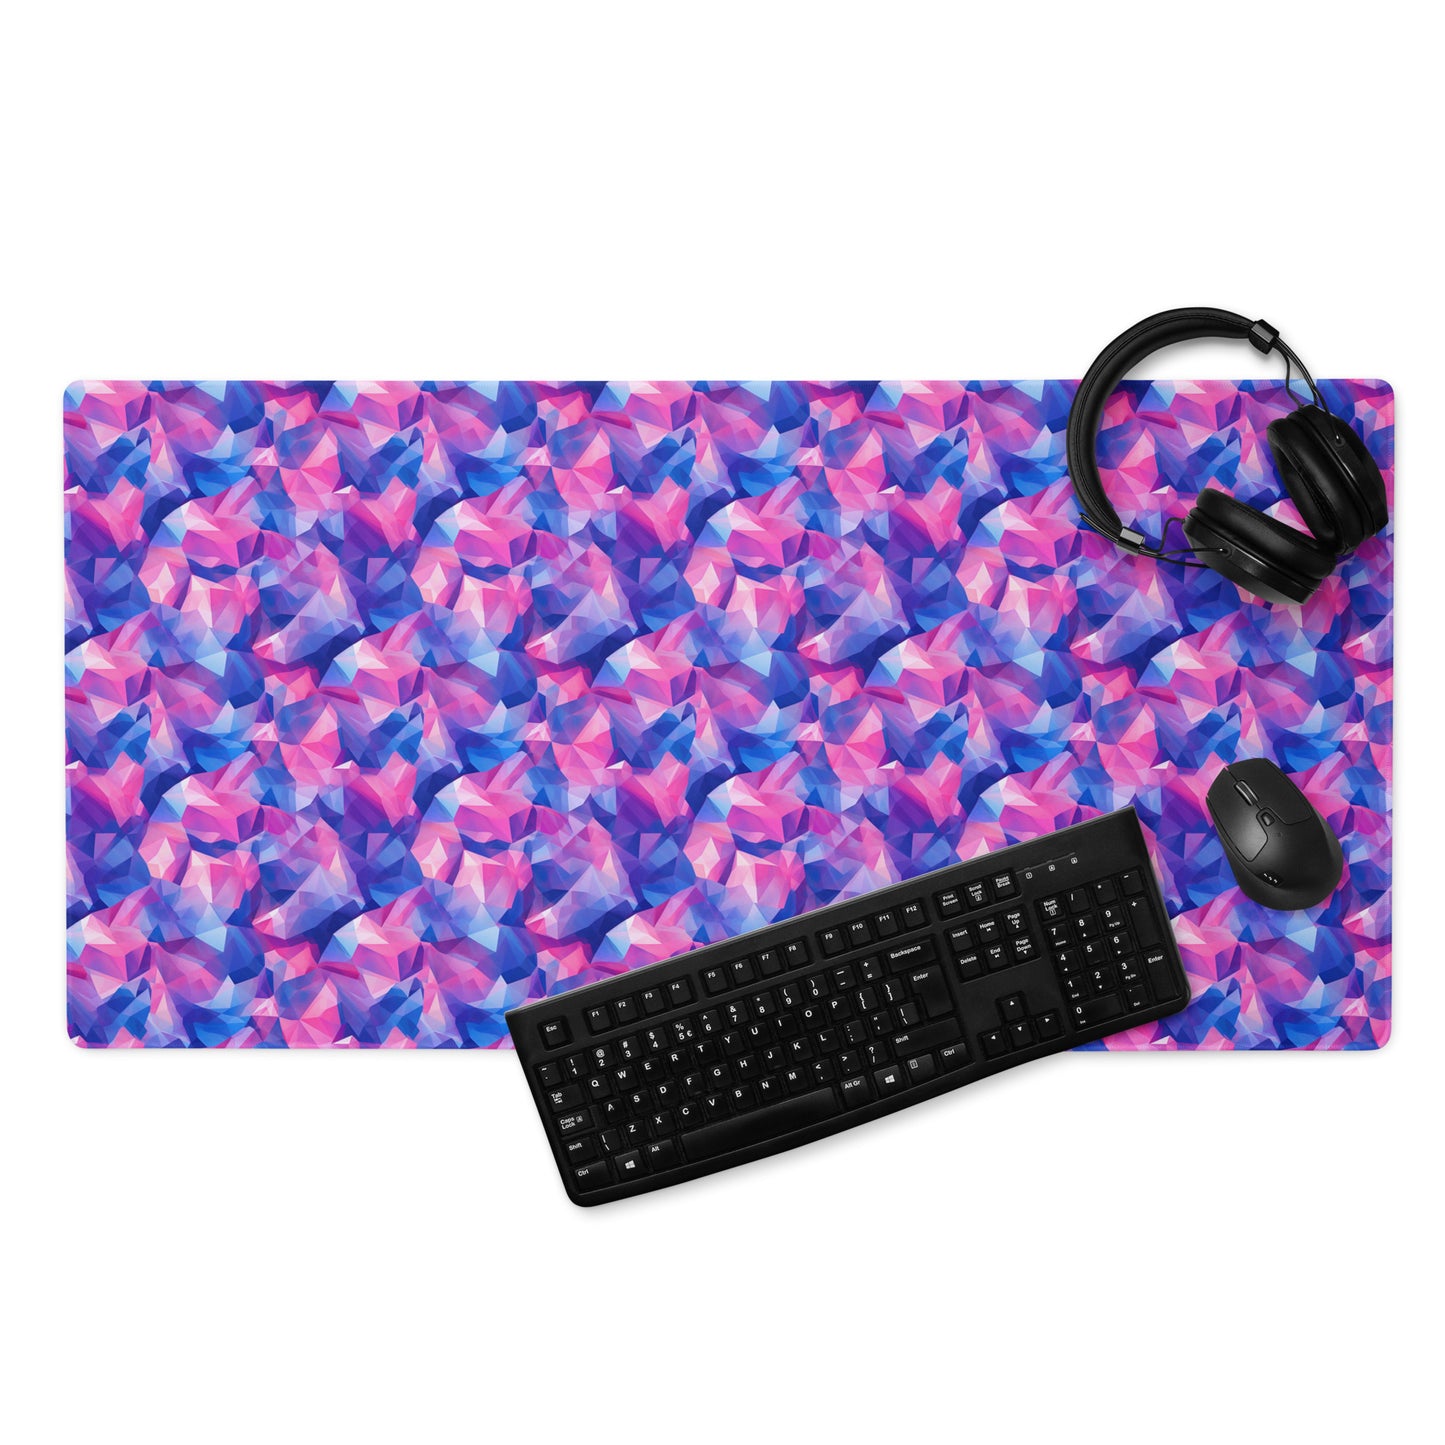 A 36" x 18" gaming desk pad with pink and blue crystals. A keyboard, mouse, and headphones sit on it.